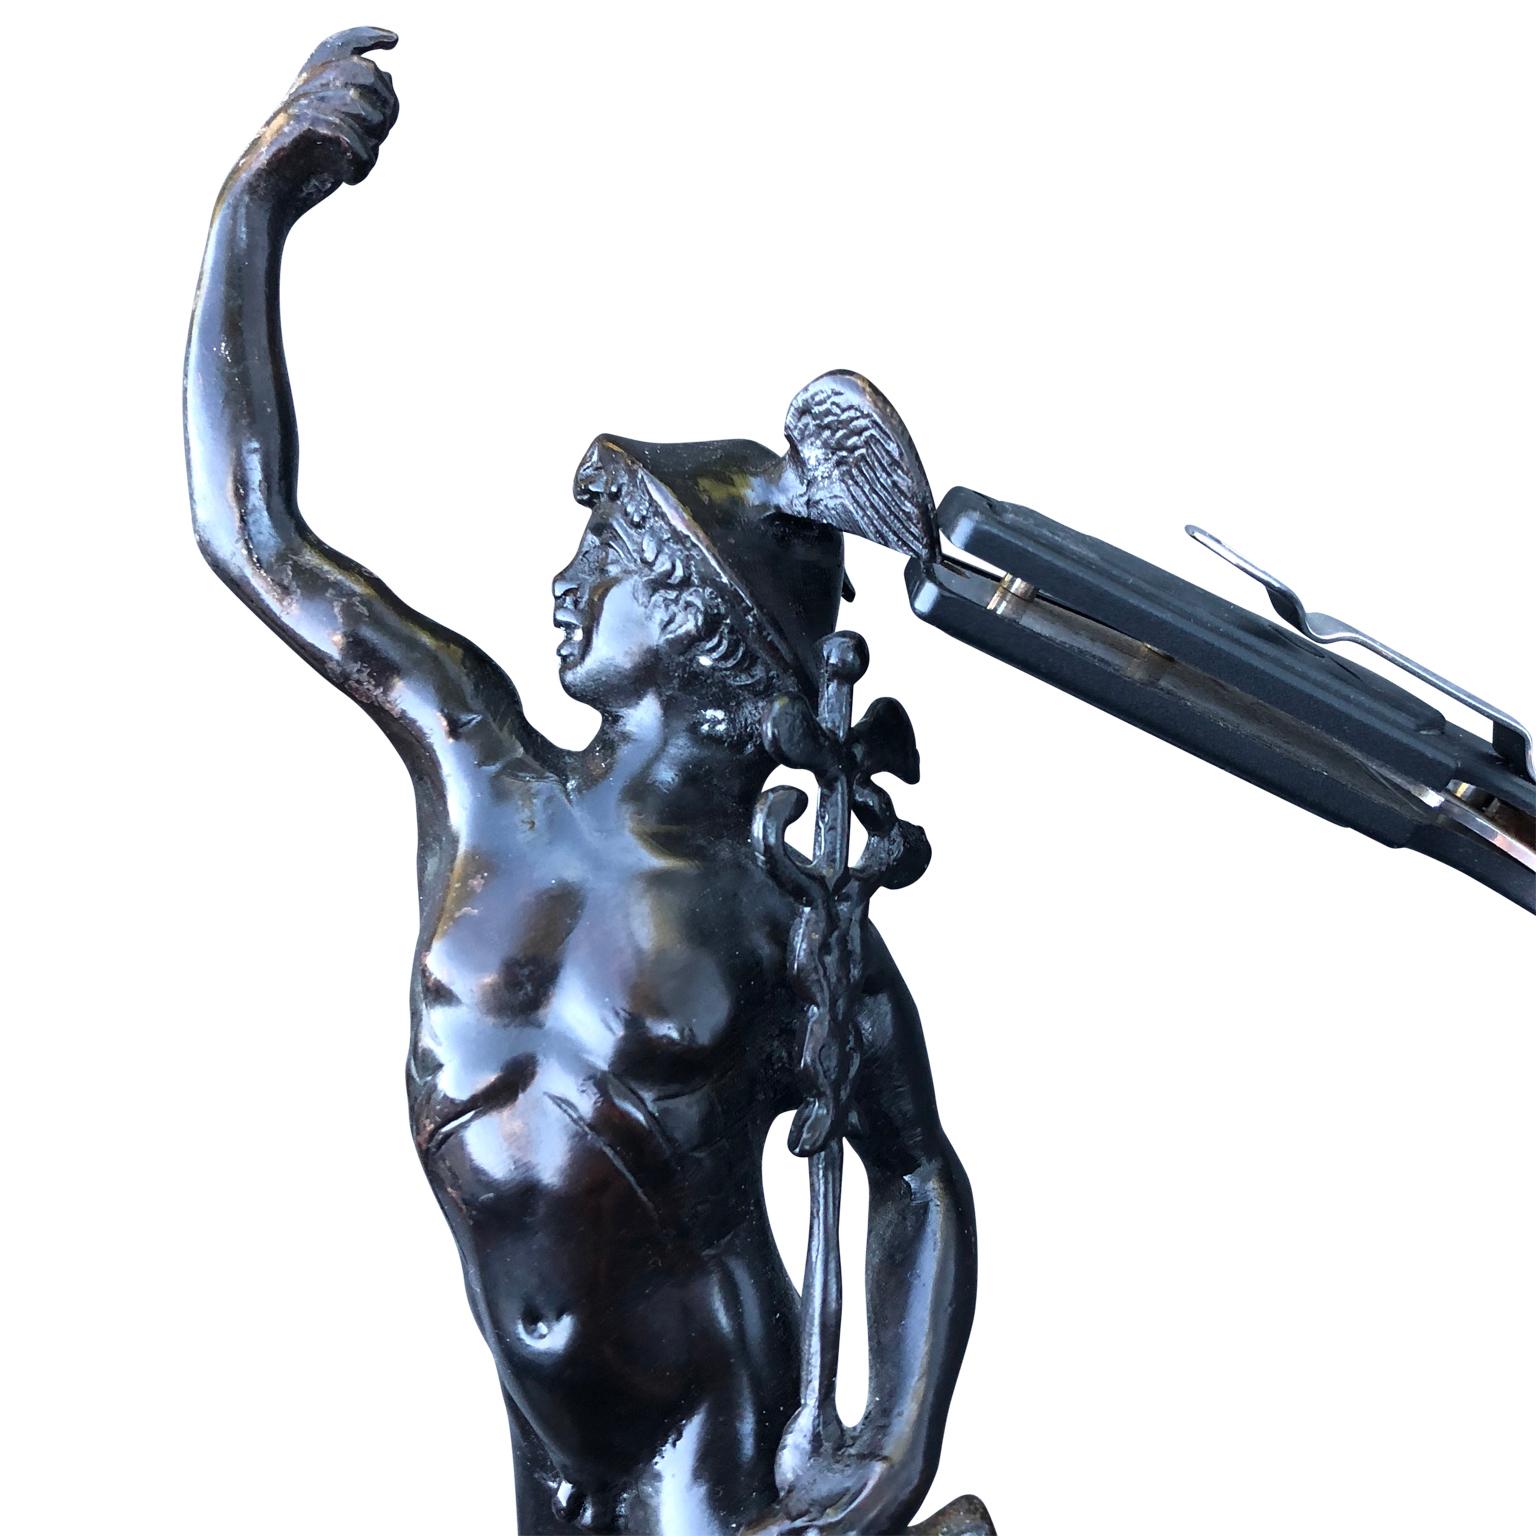 Early 20th century bronze sculpture of mercury on a marble stand.